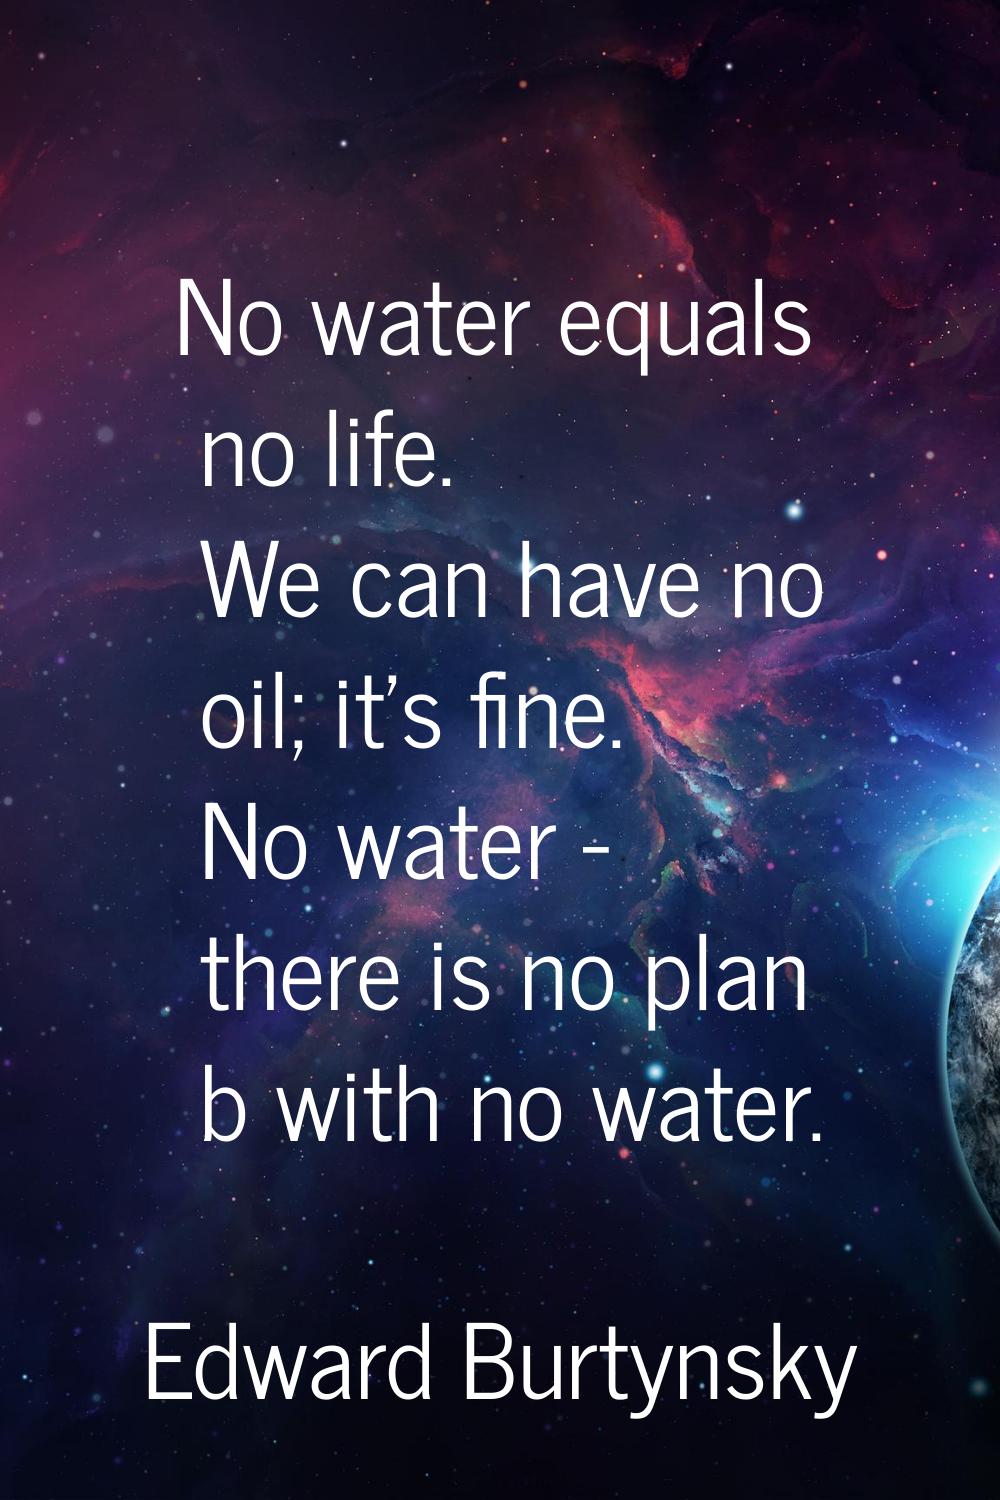 No water equals no life. We can have no oil; it's fine. No water - there is no plan b with no water